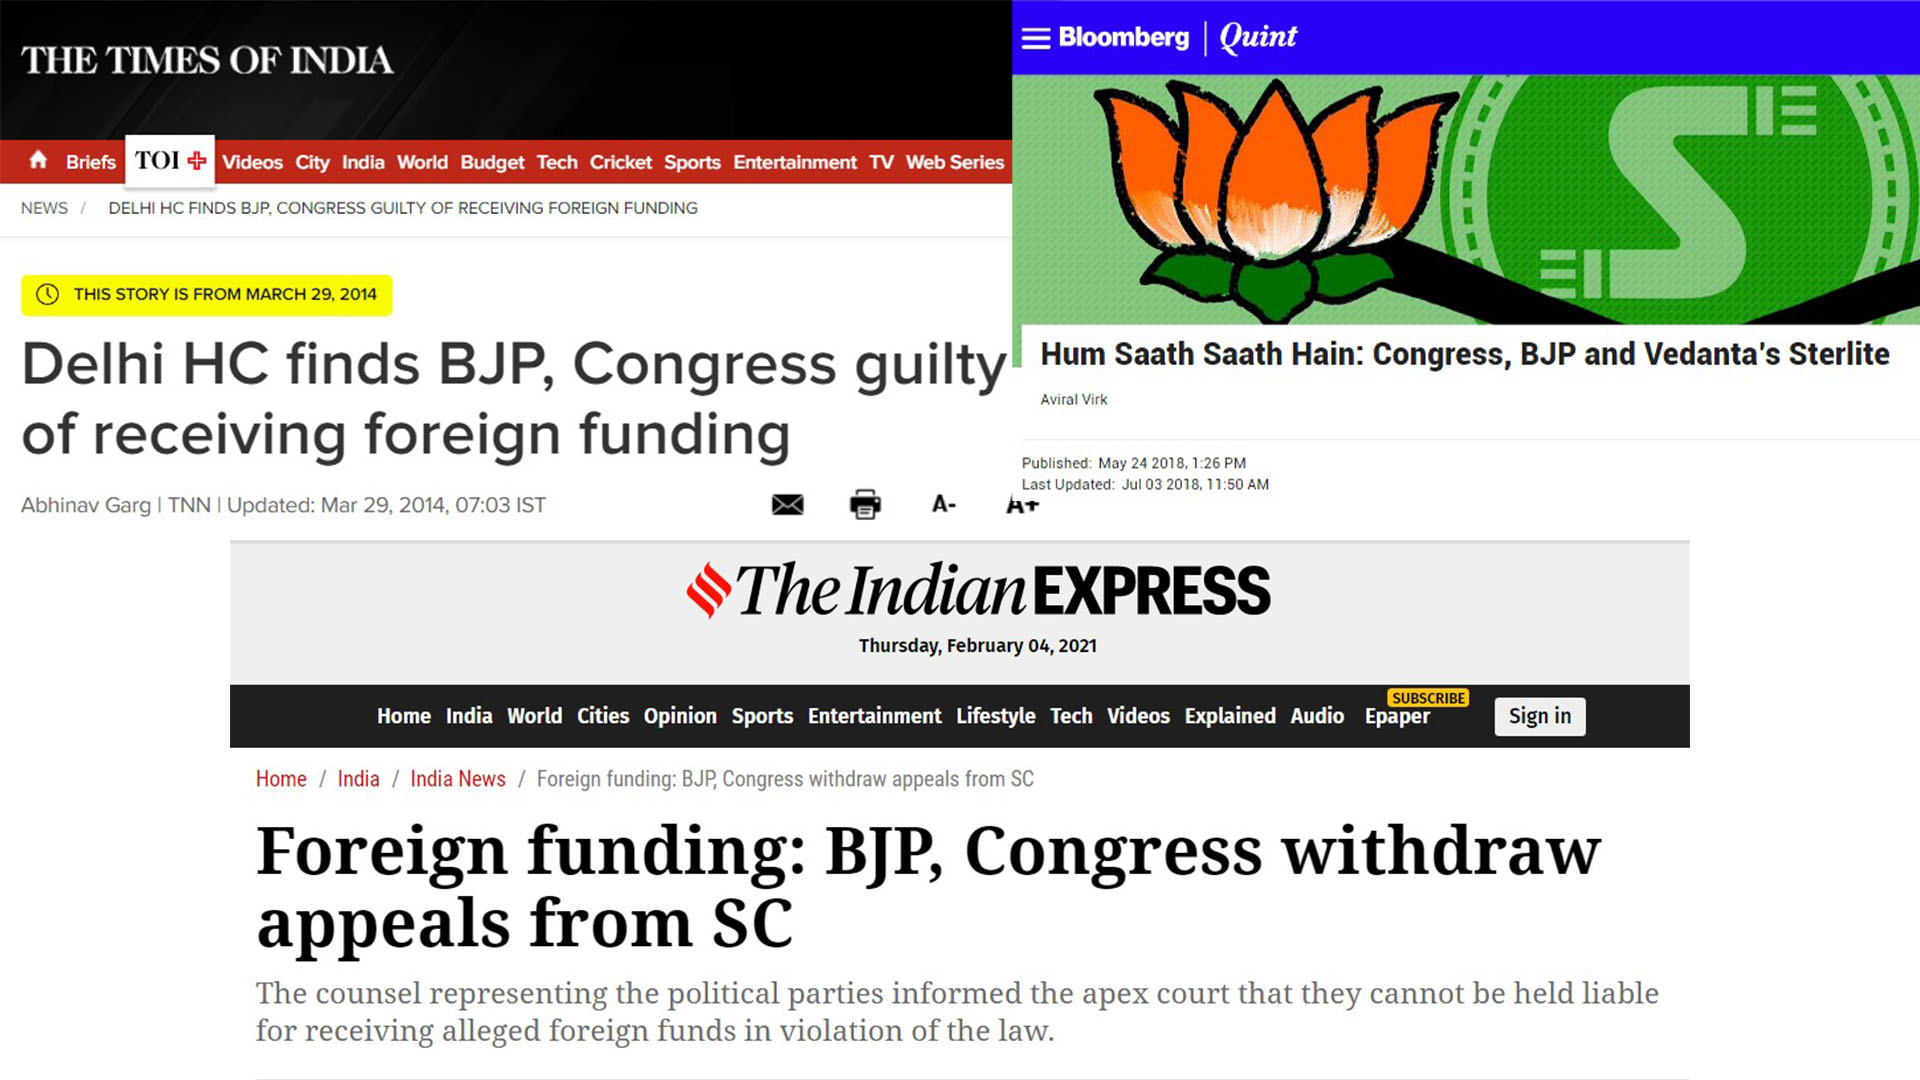 Delhi High Court judgment, 2014 (BJP & INC found guilty of taking foreign funding)